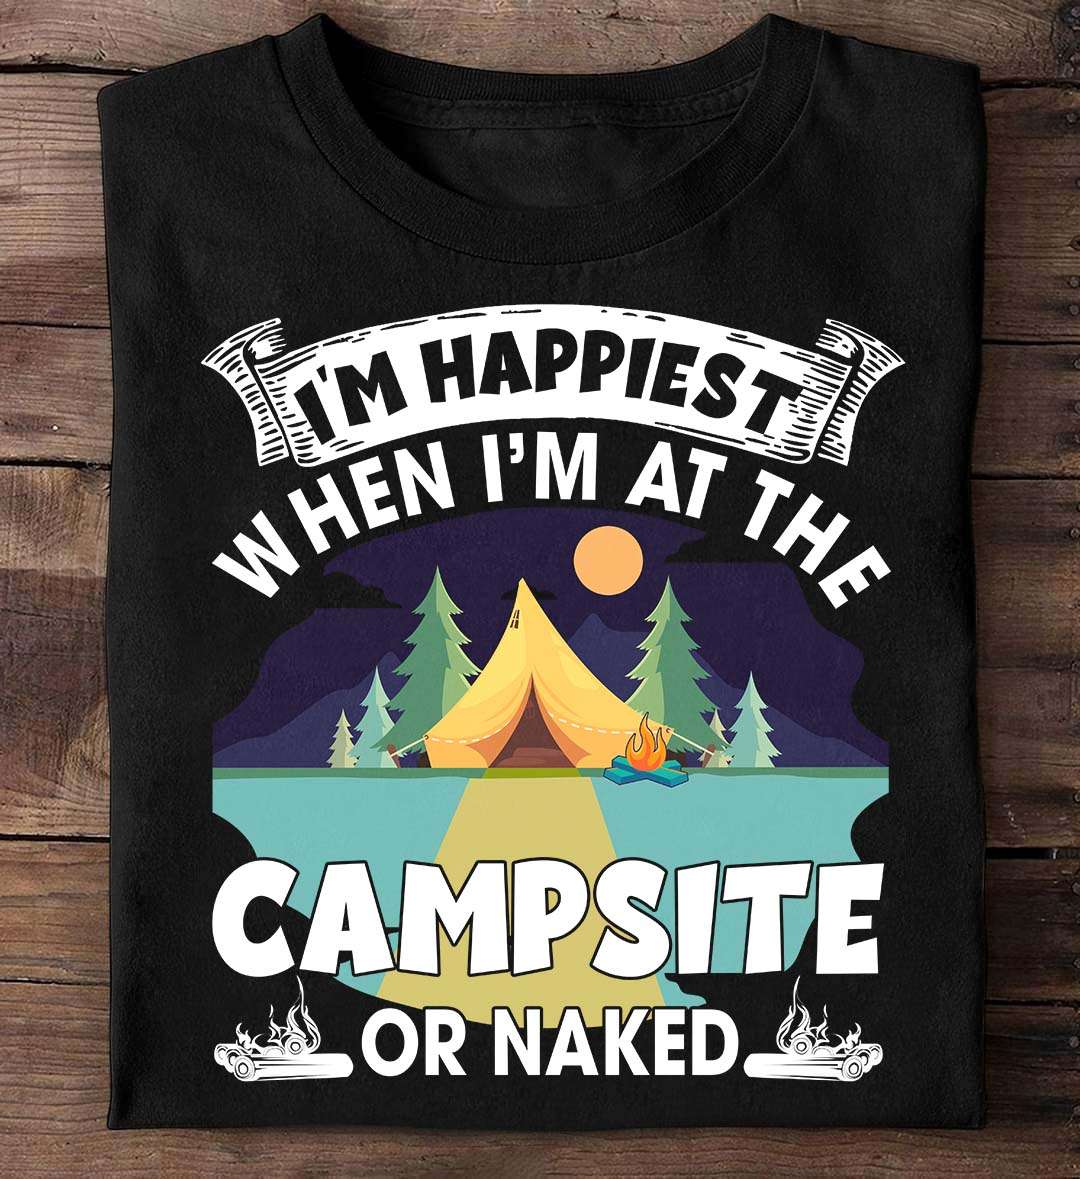 I'm happiest when I'm at the campsite or naked - Camping and naked